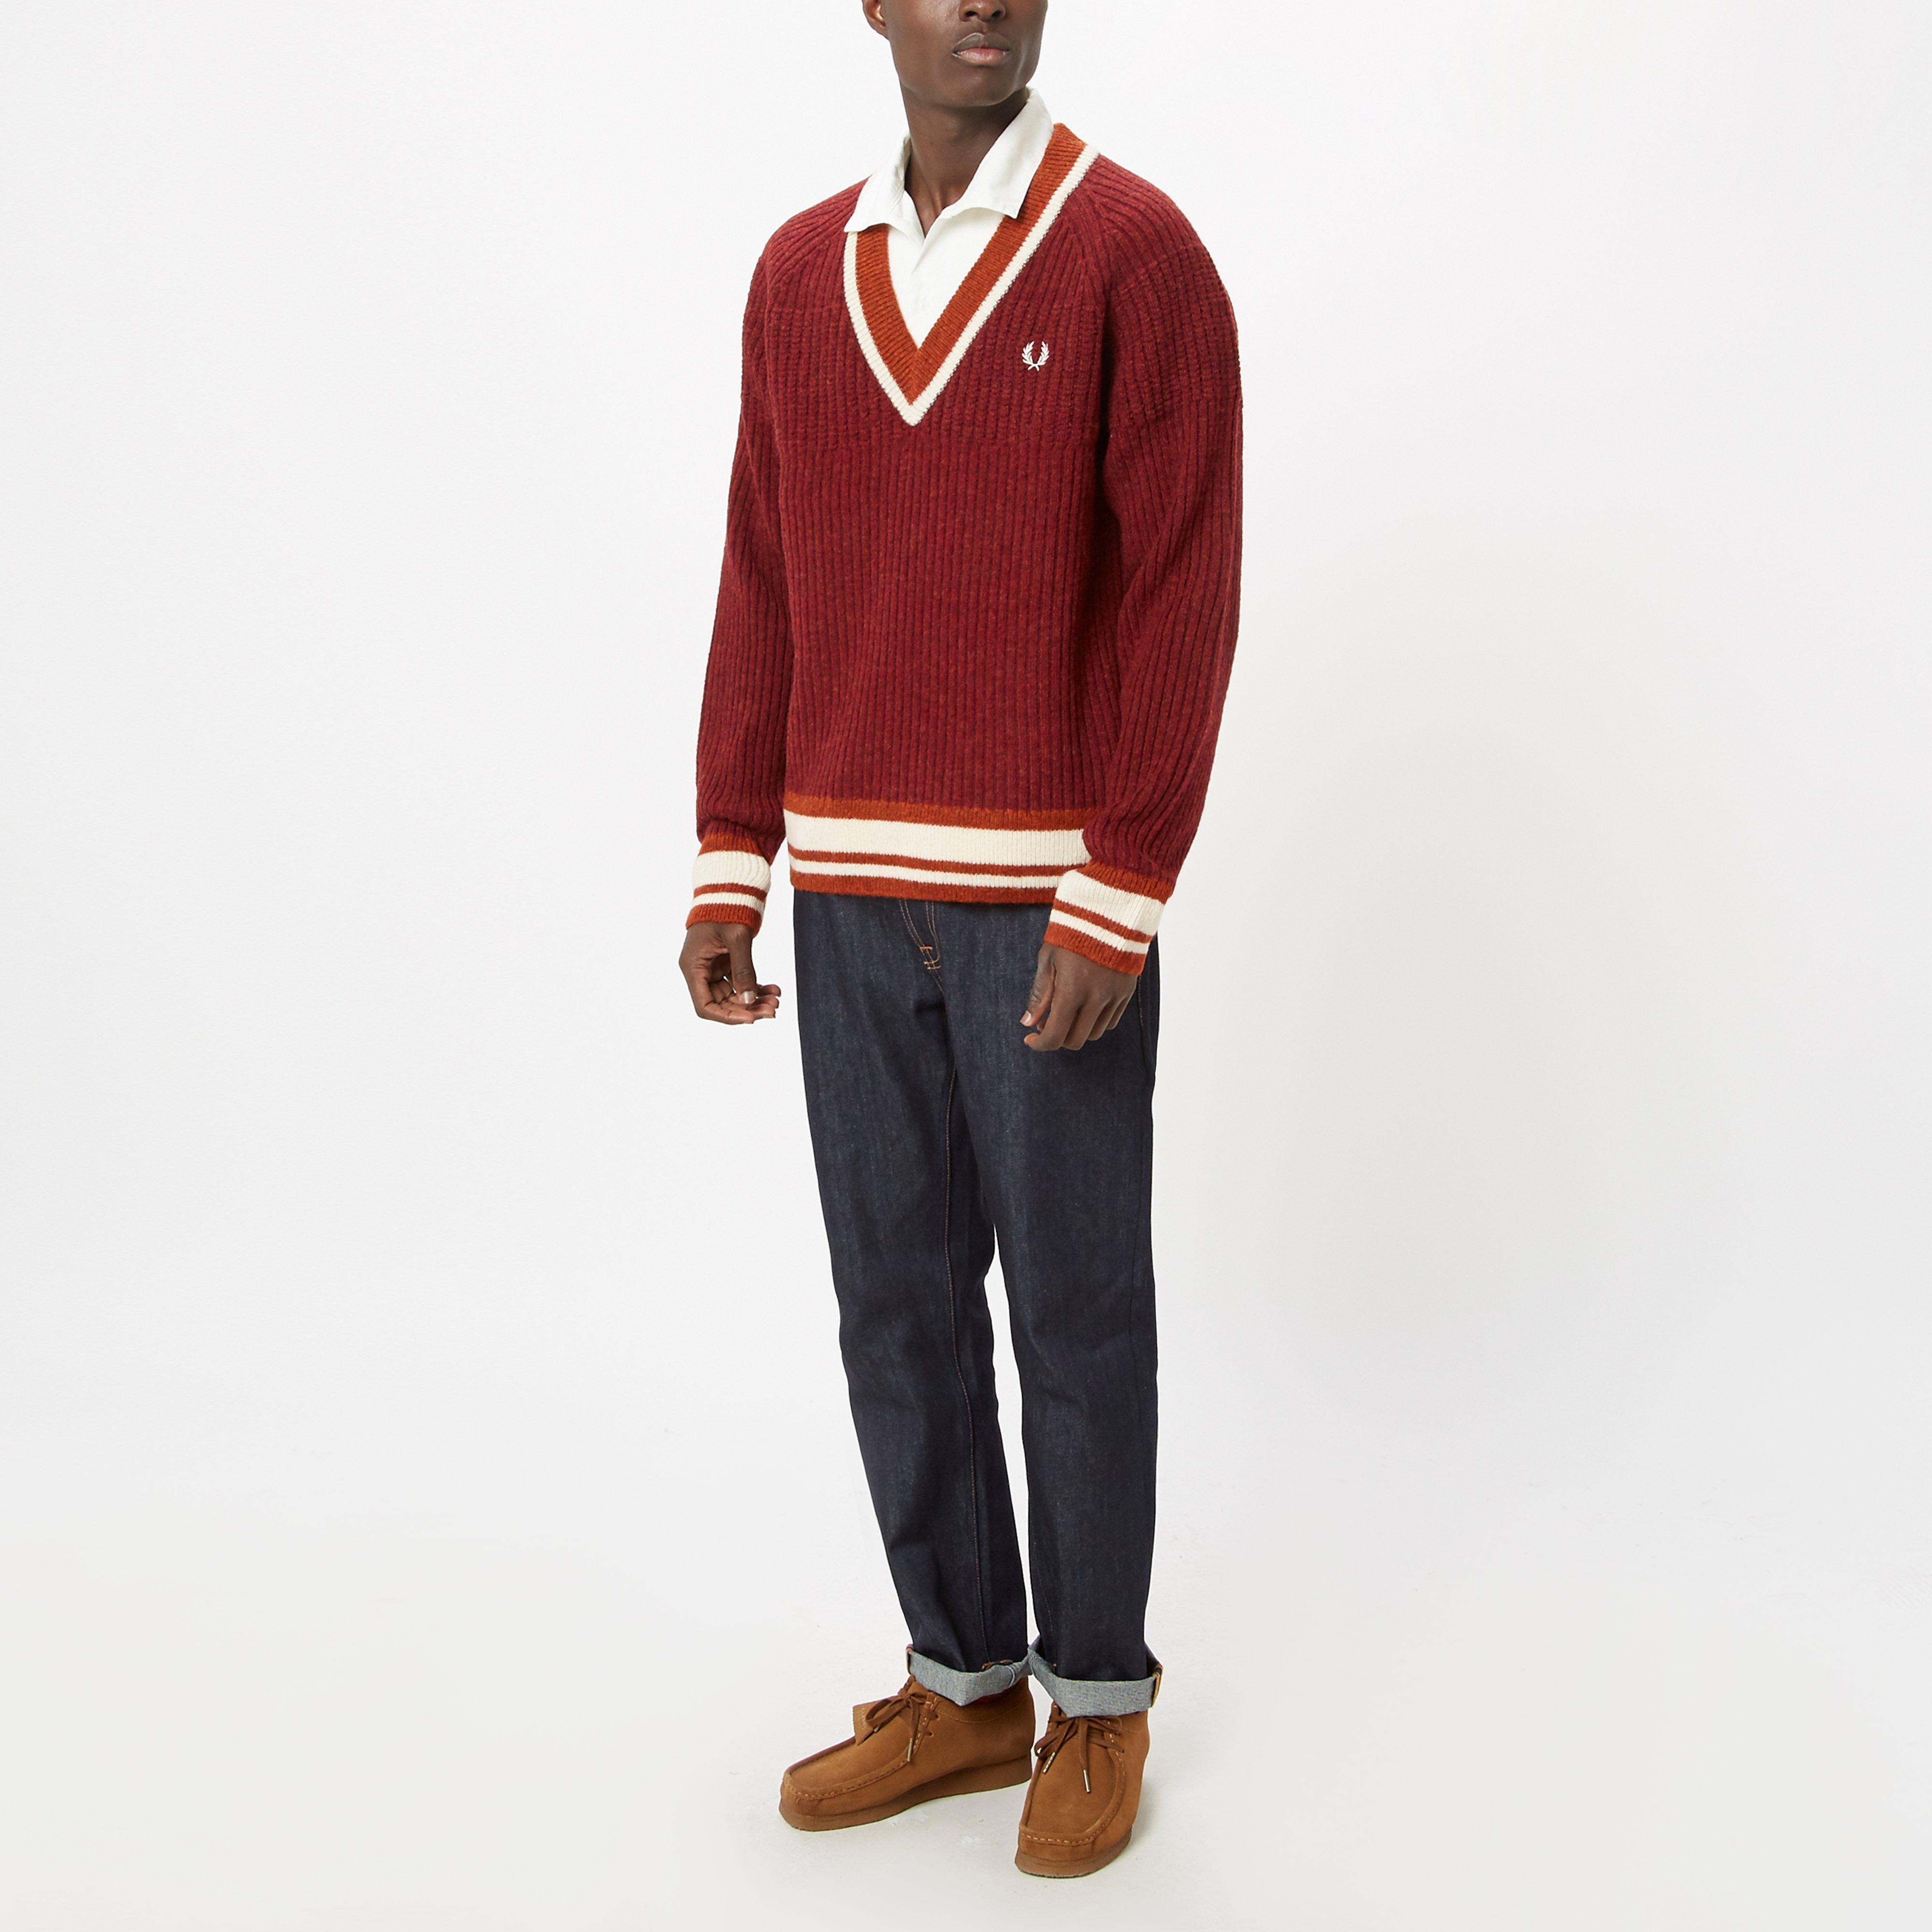 Fred Perry Wool X Nicholas Daley Texture Mix V-neck Jumper in Red/Brown  (Red) for Men - Lyst